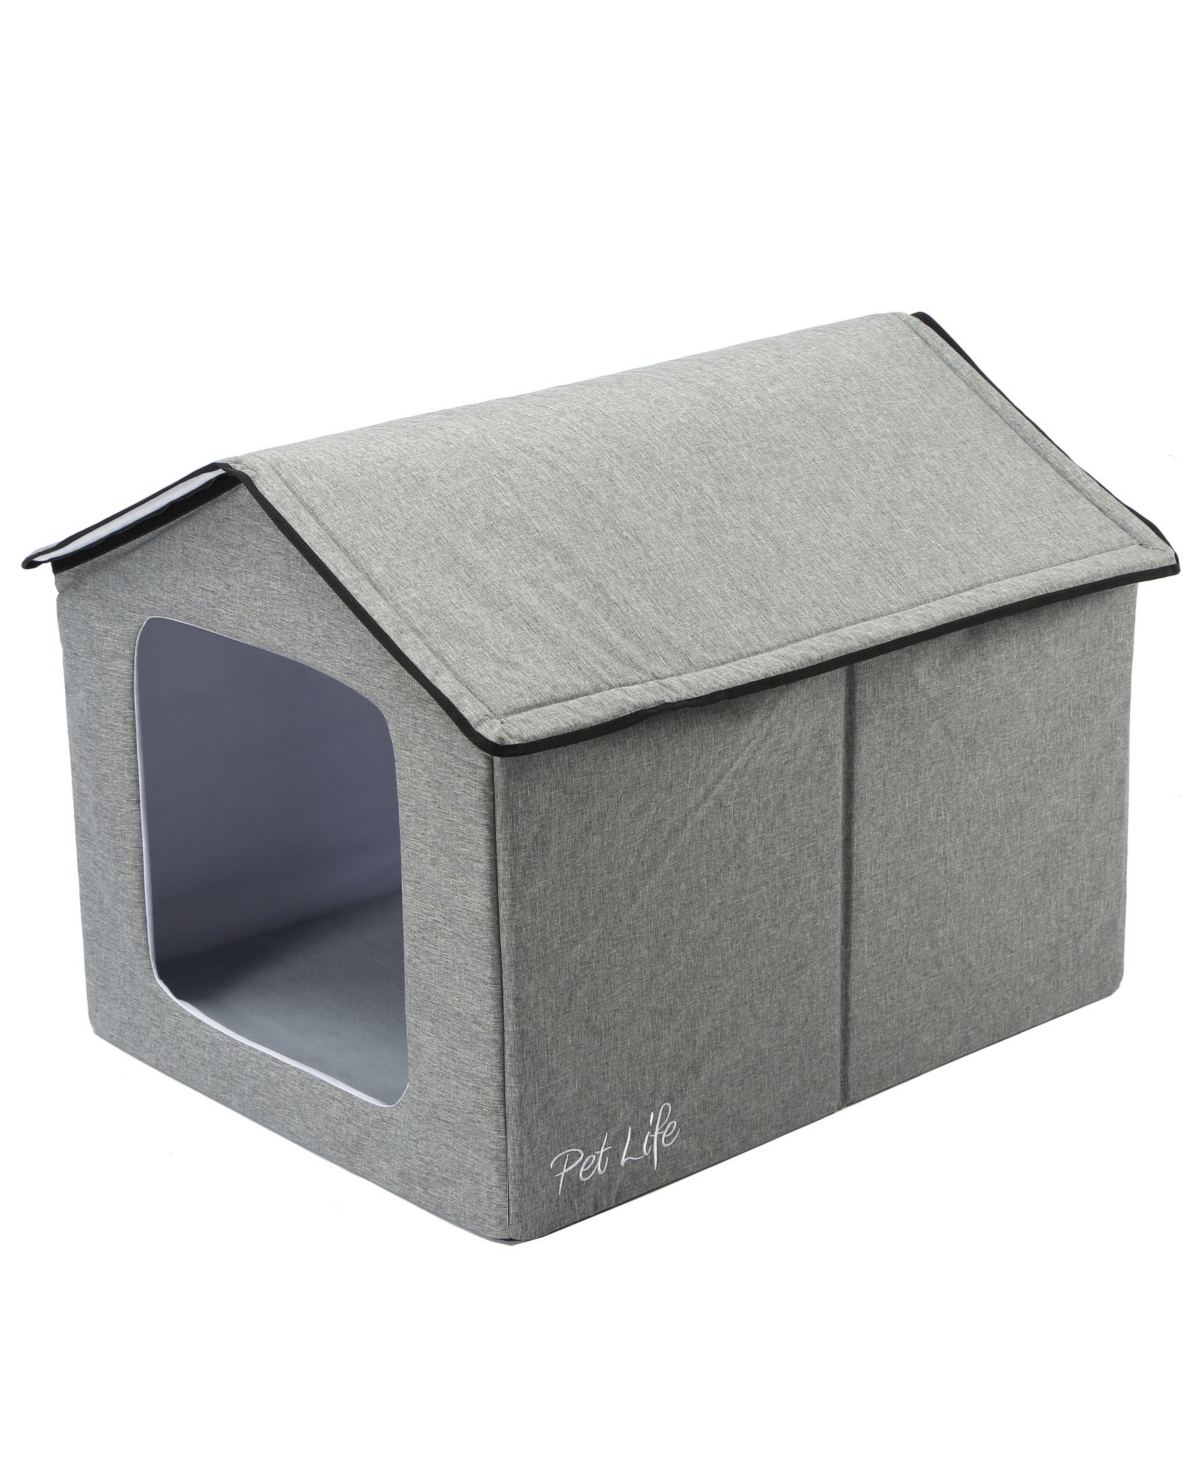 "Hush Puppy" Electronic Heating and Cooling Smart Collapsible Pet House - Navy